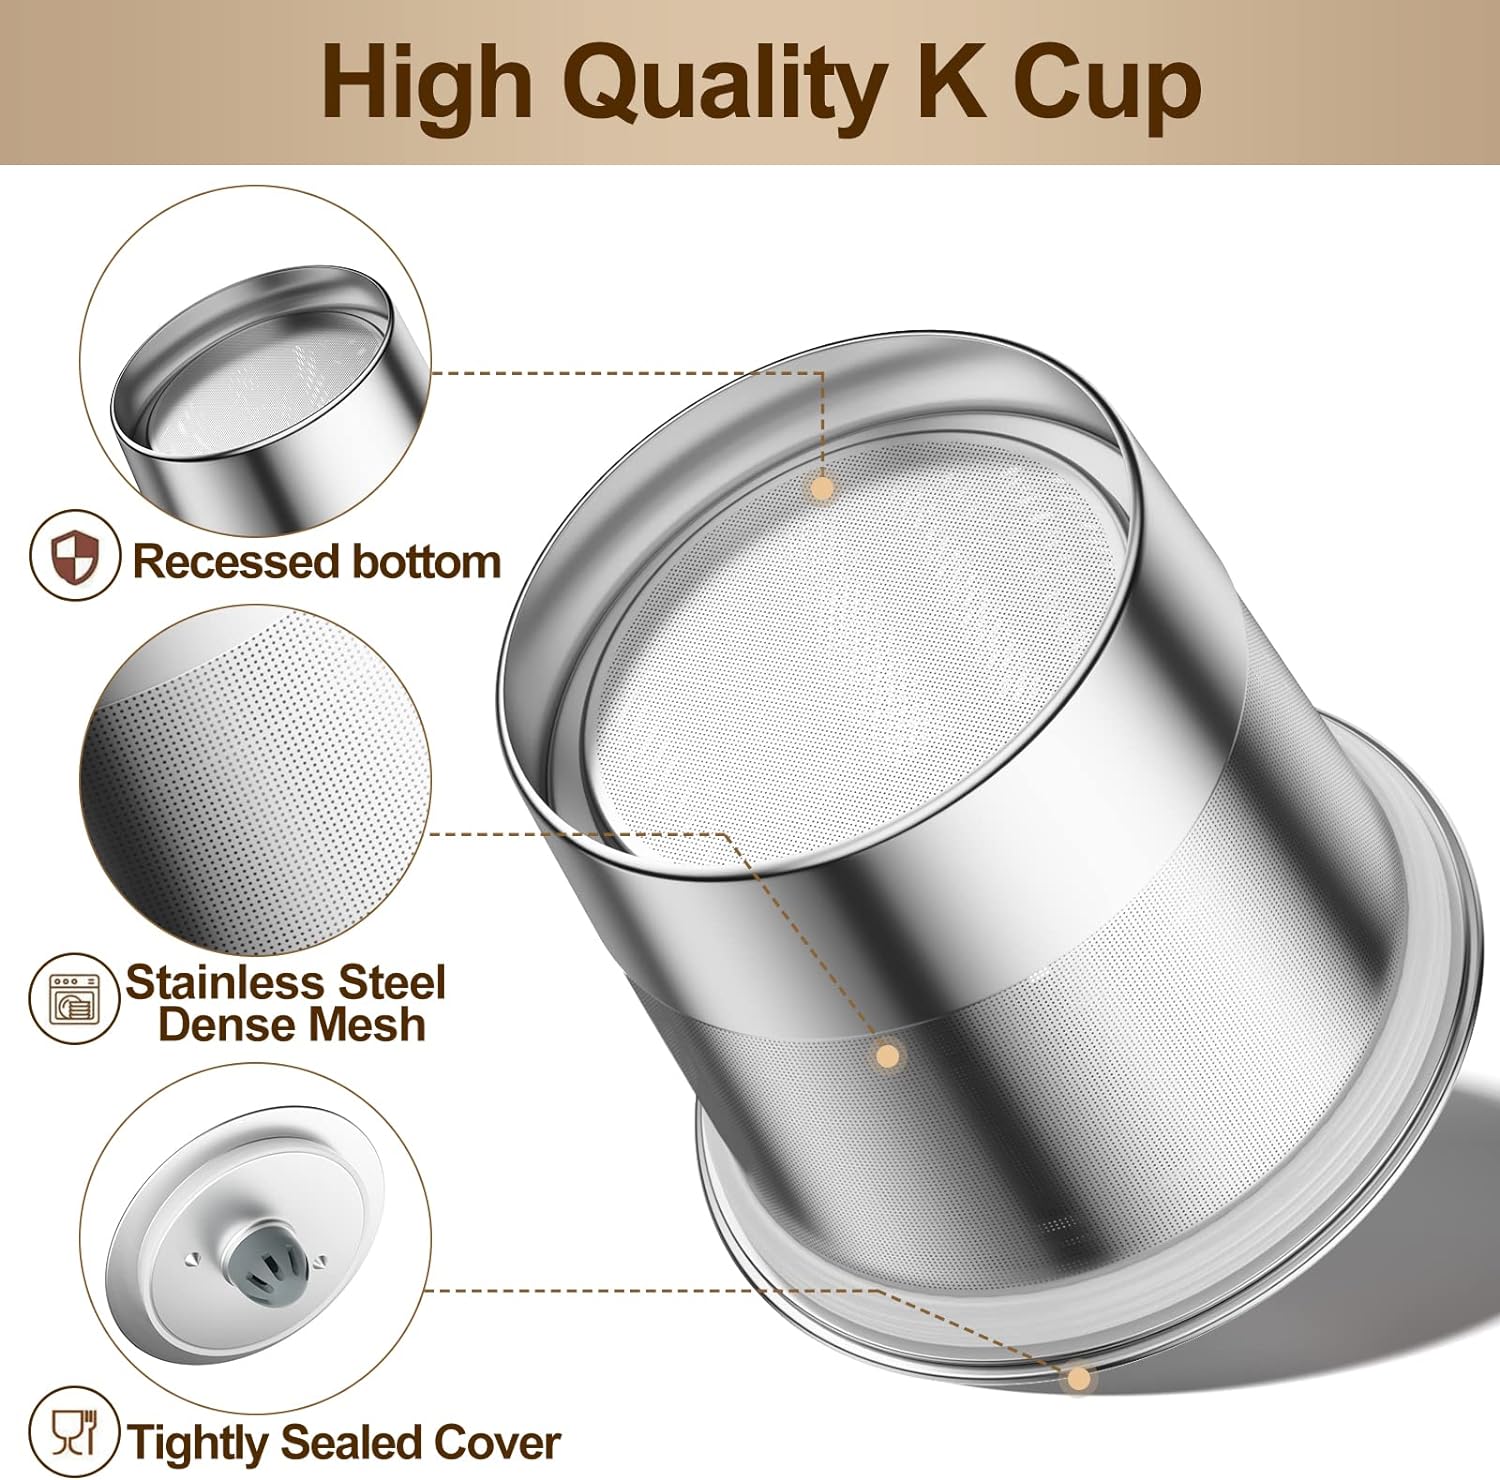 RETHONE K Cup Reusable Coffee Pods, Stainless Steel Reusable K Cups Coffee Filter Compatible for Keurig 1.0  2.0 Coffee Makers BPA-Free Refillable Coffee Filters (1 Pack)